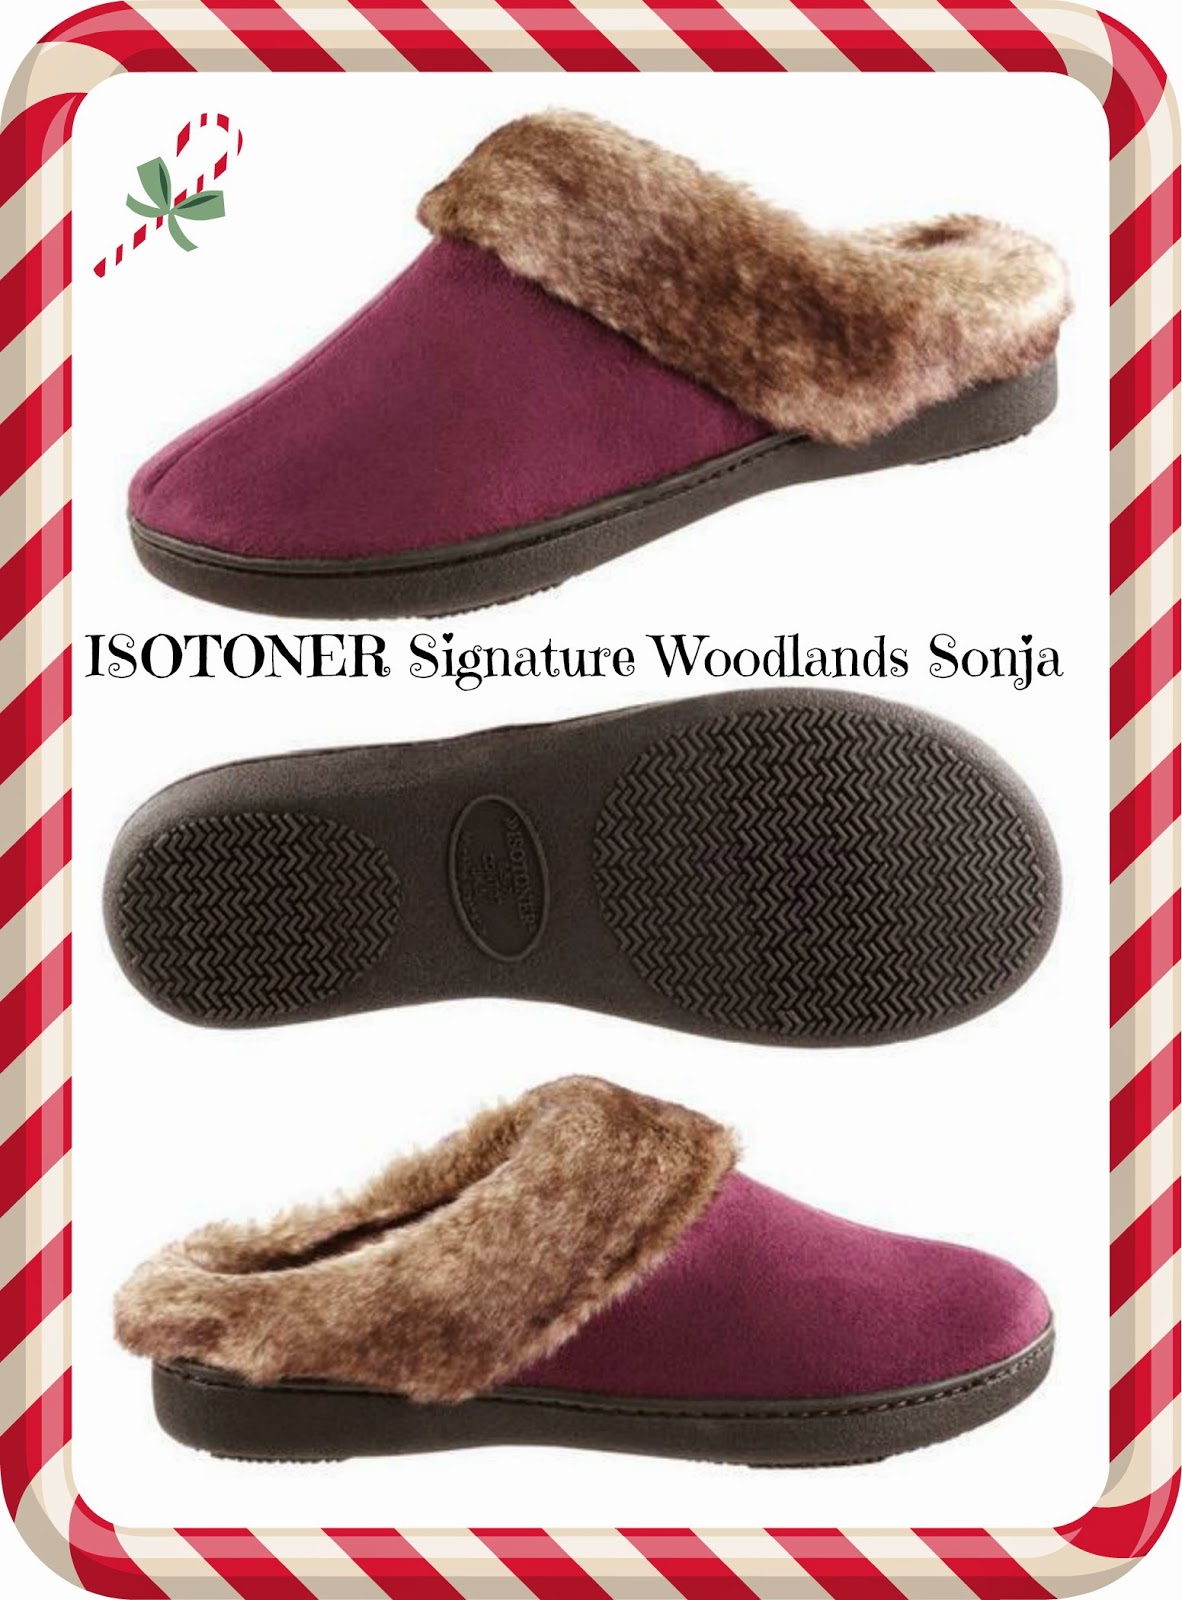 isotoner slippers target